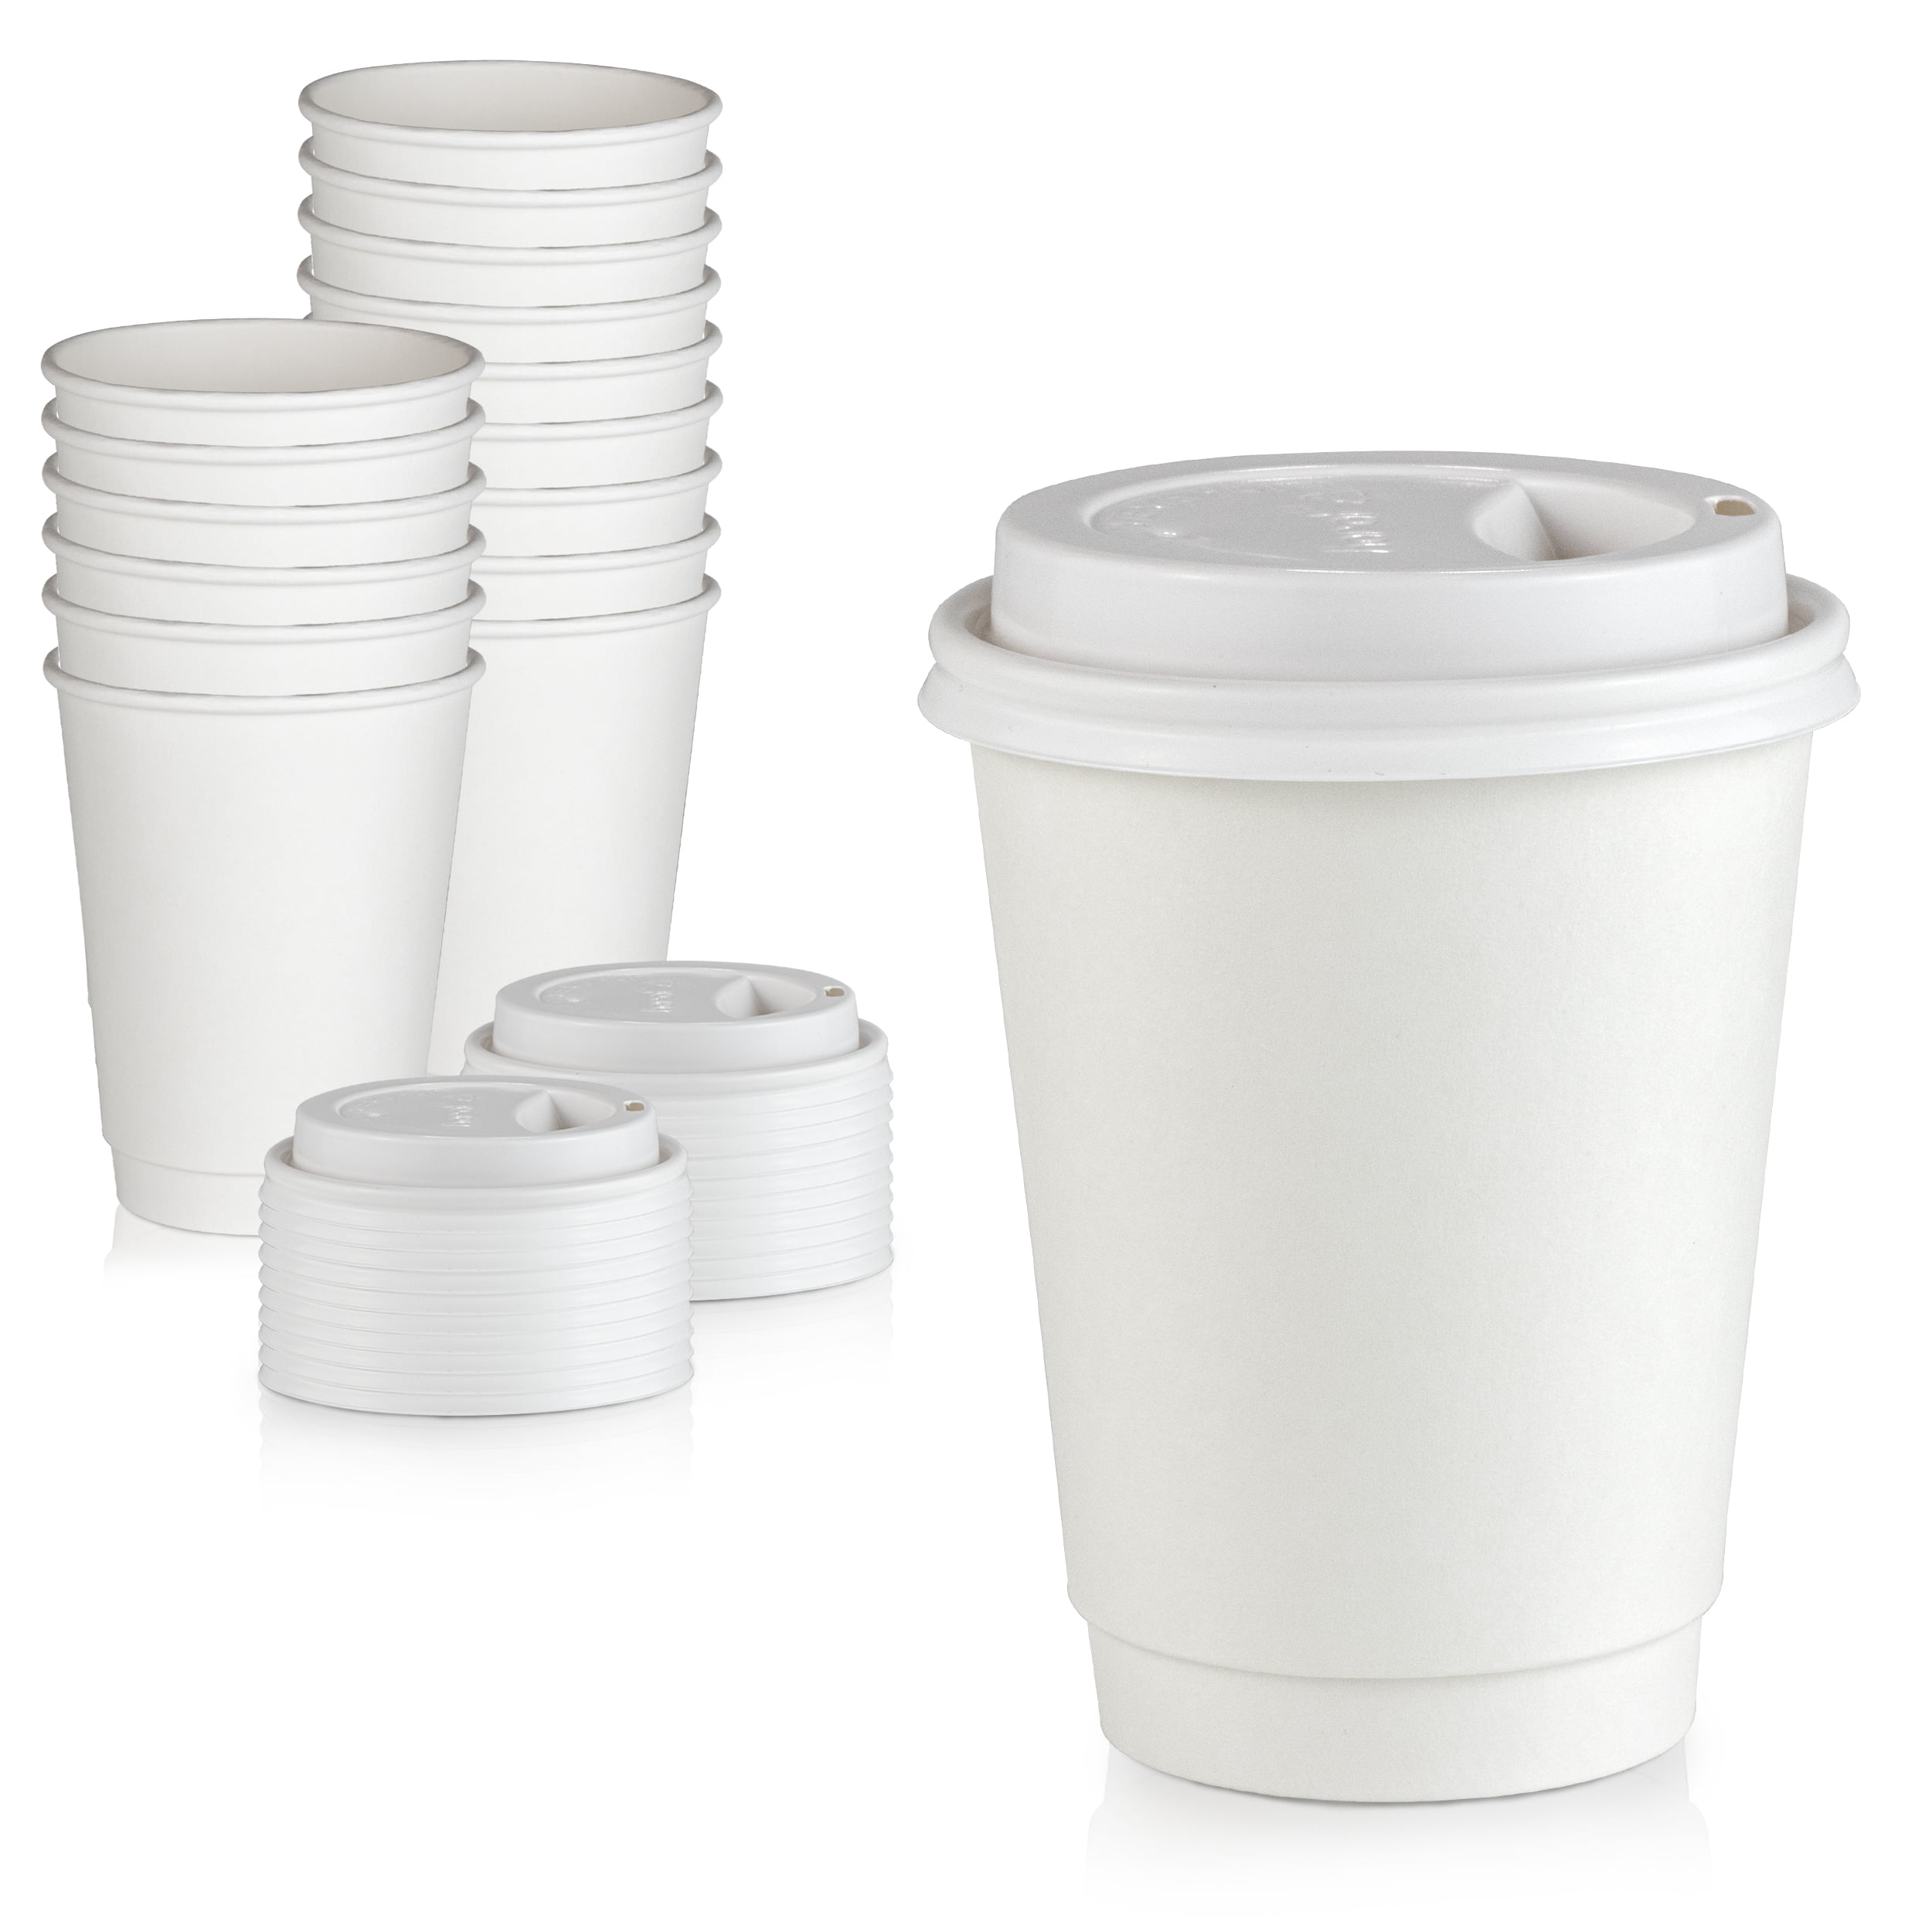 Details about   20oz Classic Durable Disposable Paper Cups & White Lids For Hot/Cold 